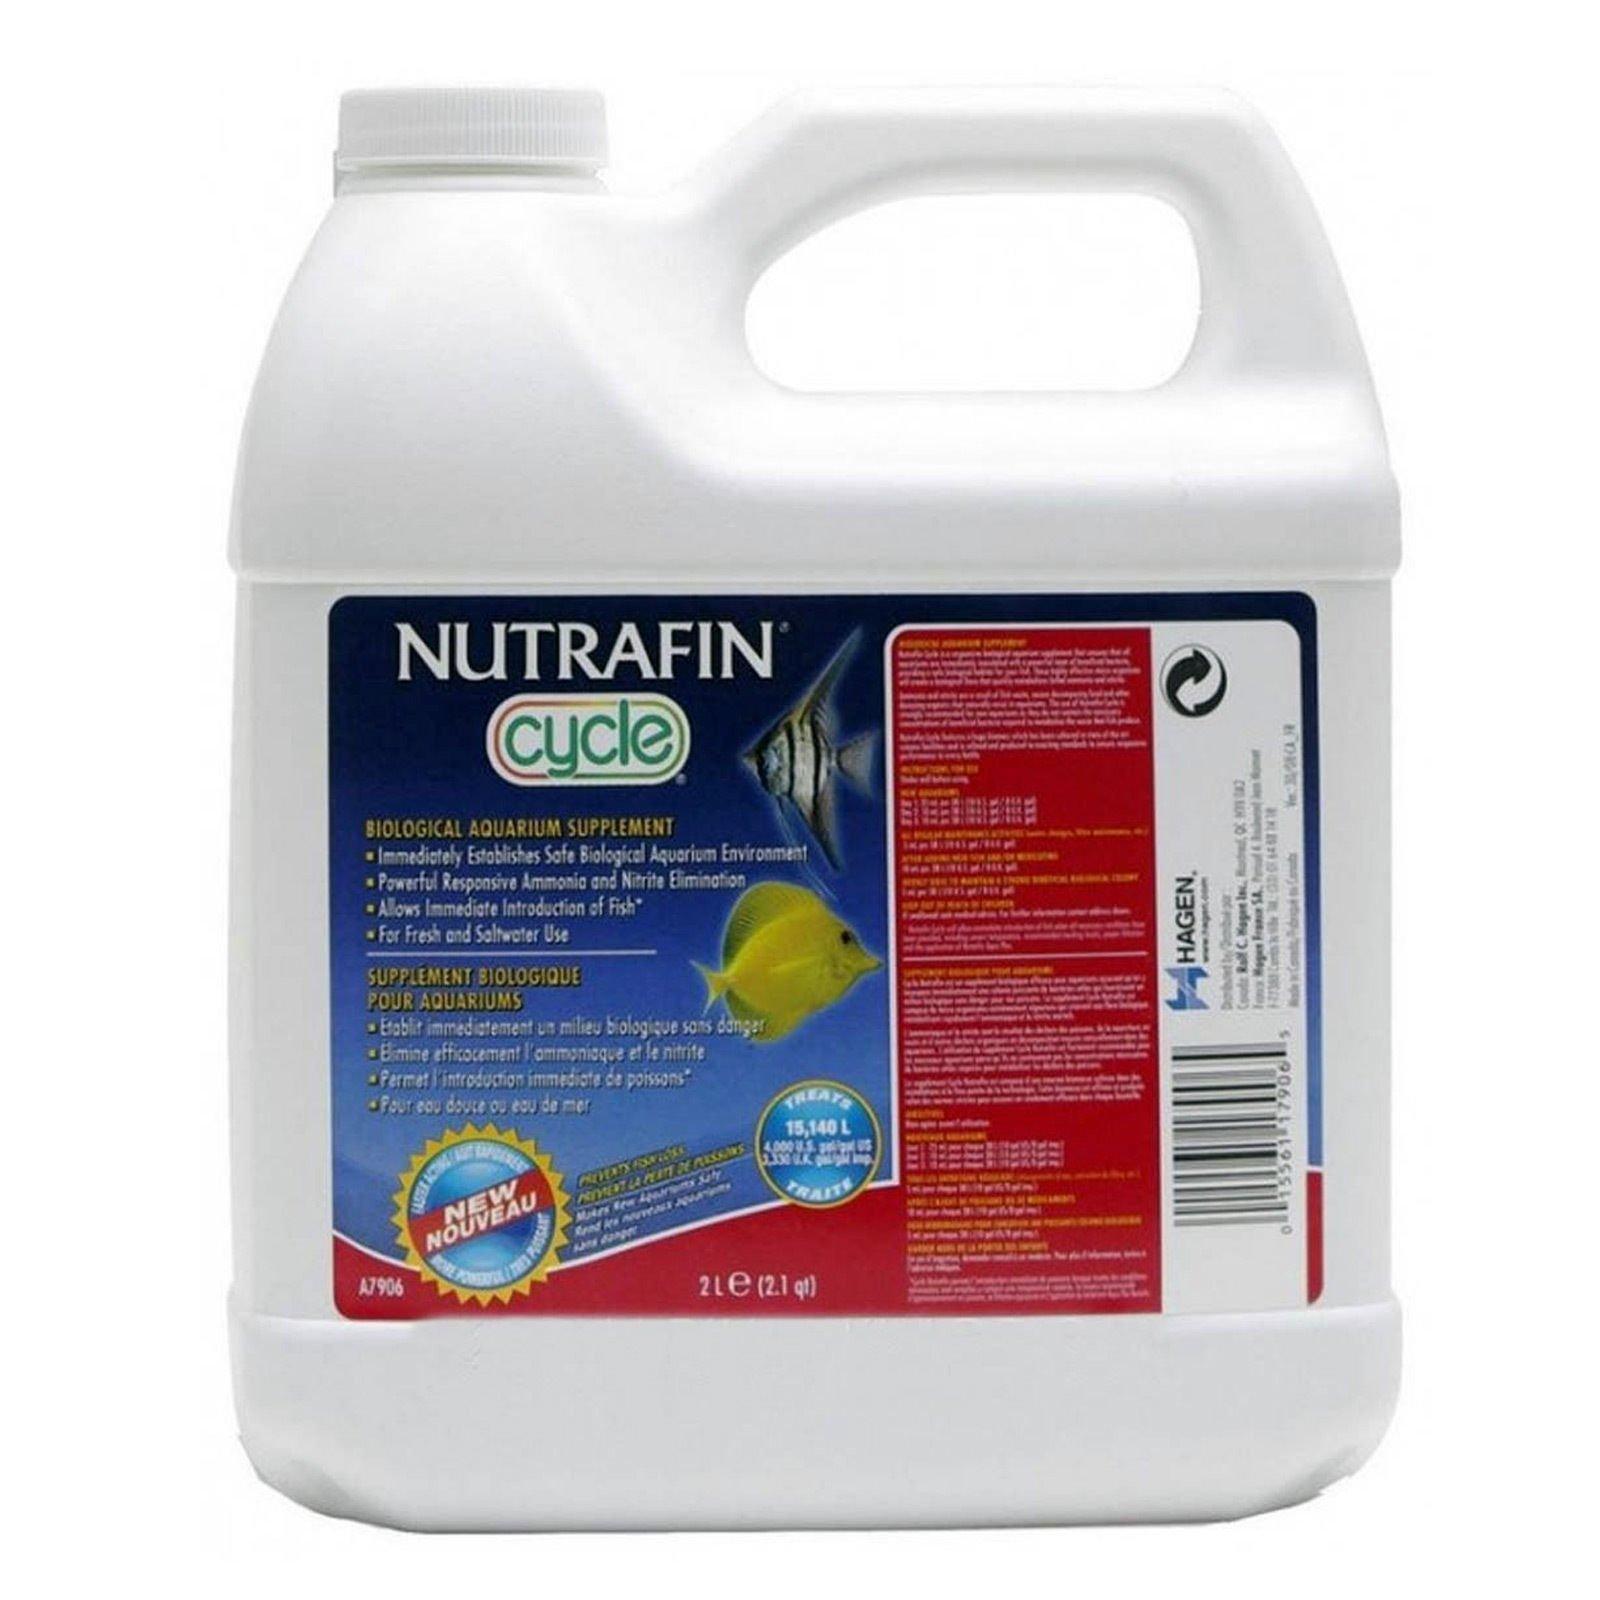 Nutrafin Cycle 2 Litre